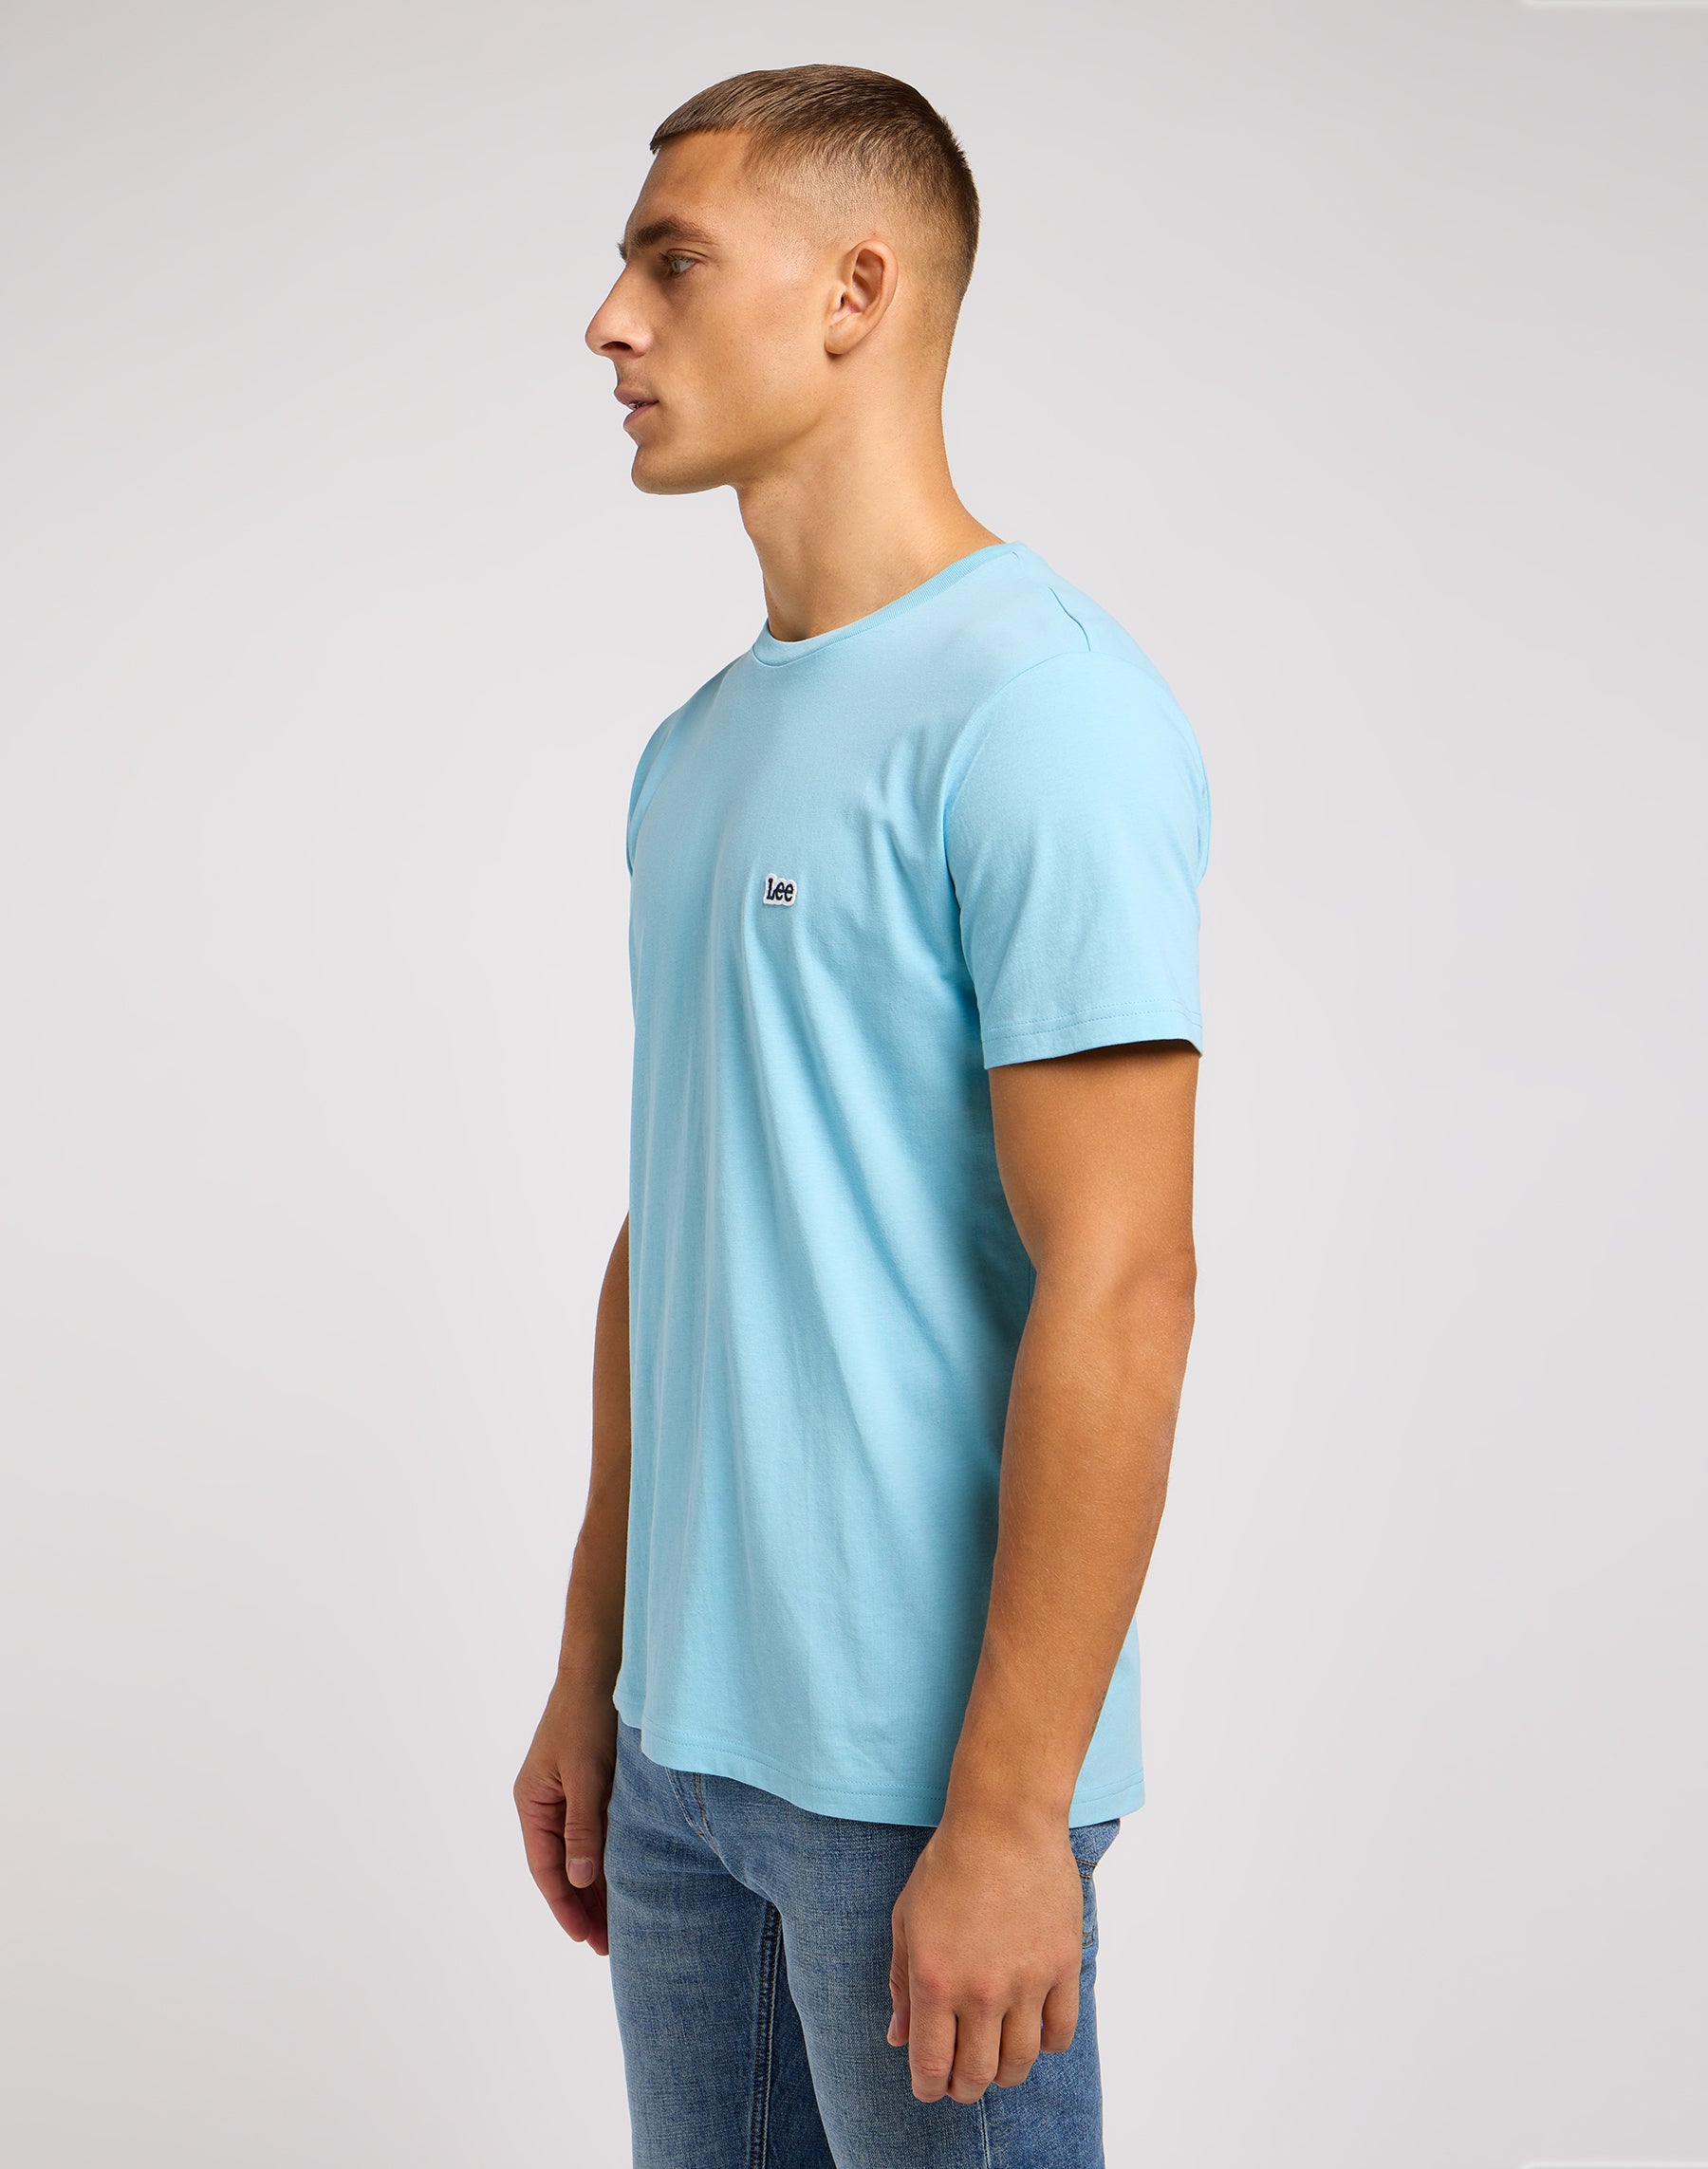 Shortsleeves Patch Logo Tee in Preppy Blue T-Shirts Lee   